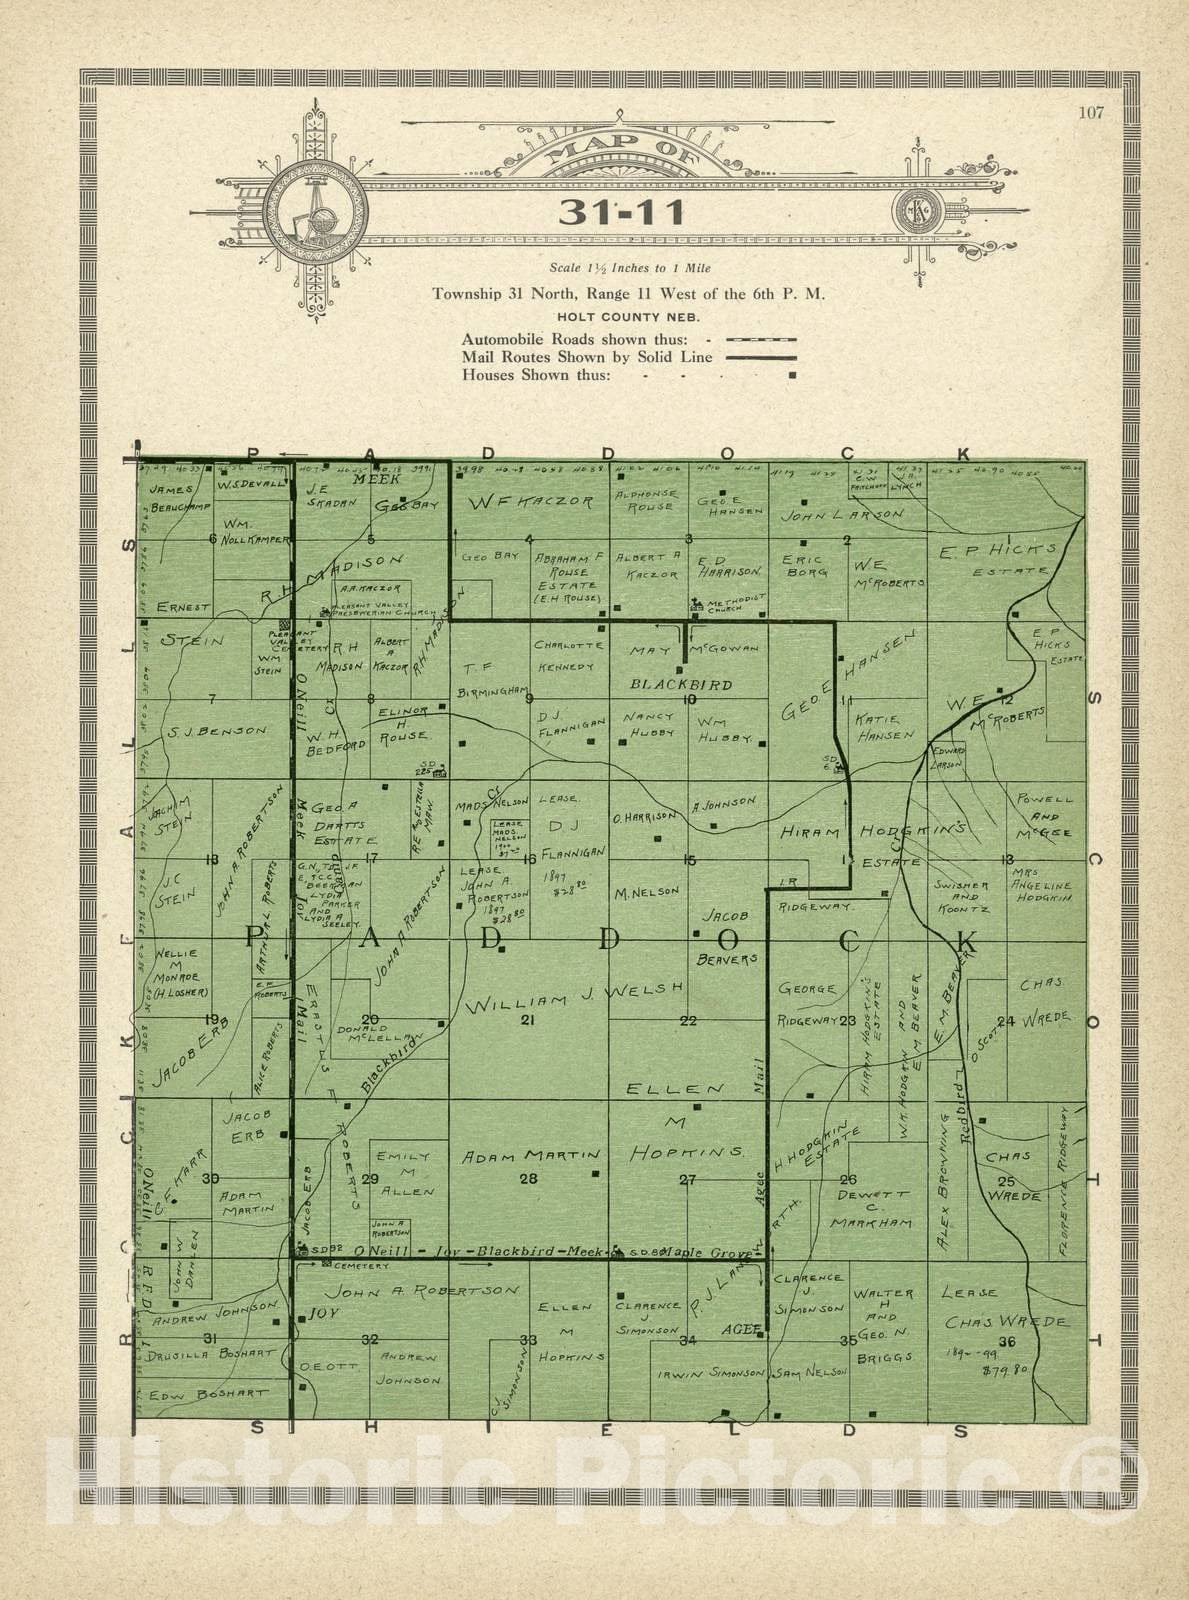 Historic 1915 Map - Atlas and plat Book of Holt County, Nebraska - Map of 31-11 - Standard Atlas and Directory of Holt County, Nebraska